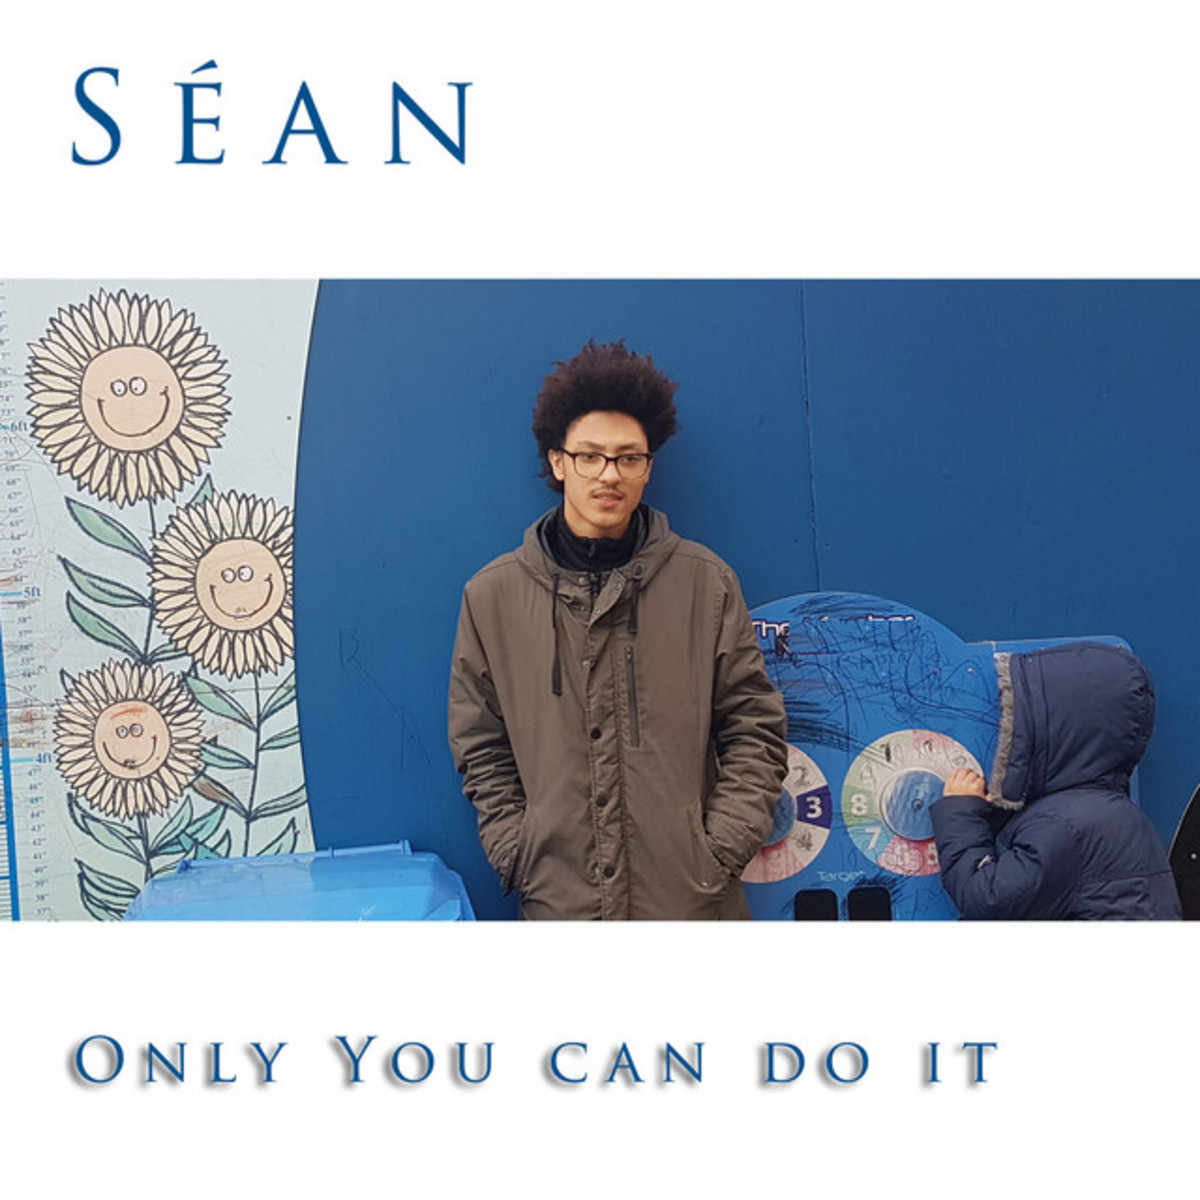 synthpop-single-review-only-you-can-do-it-by-san